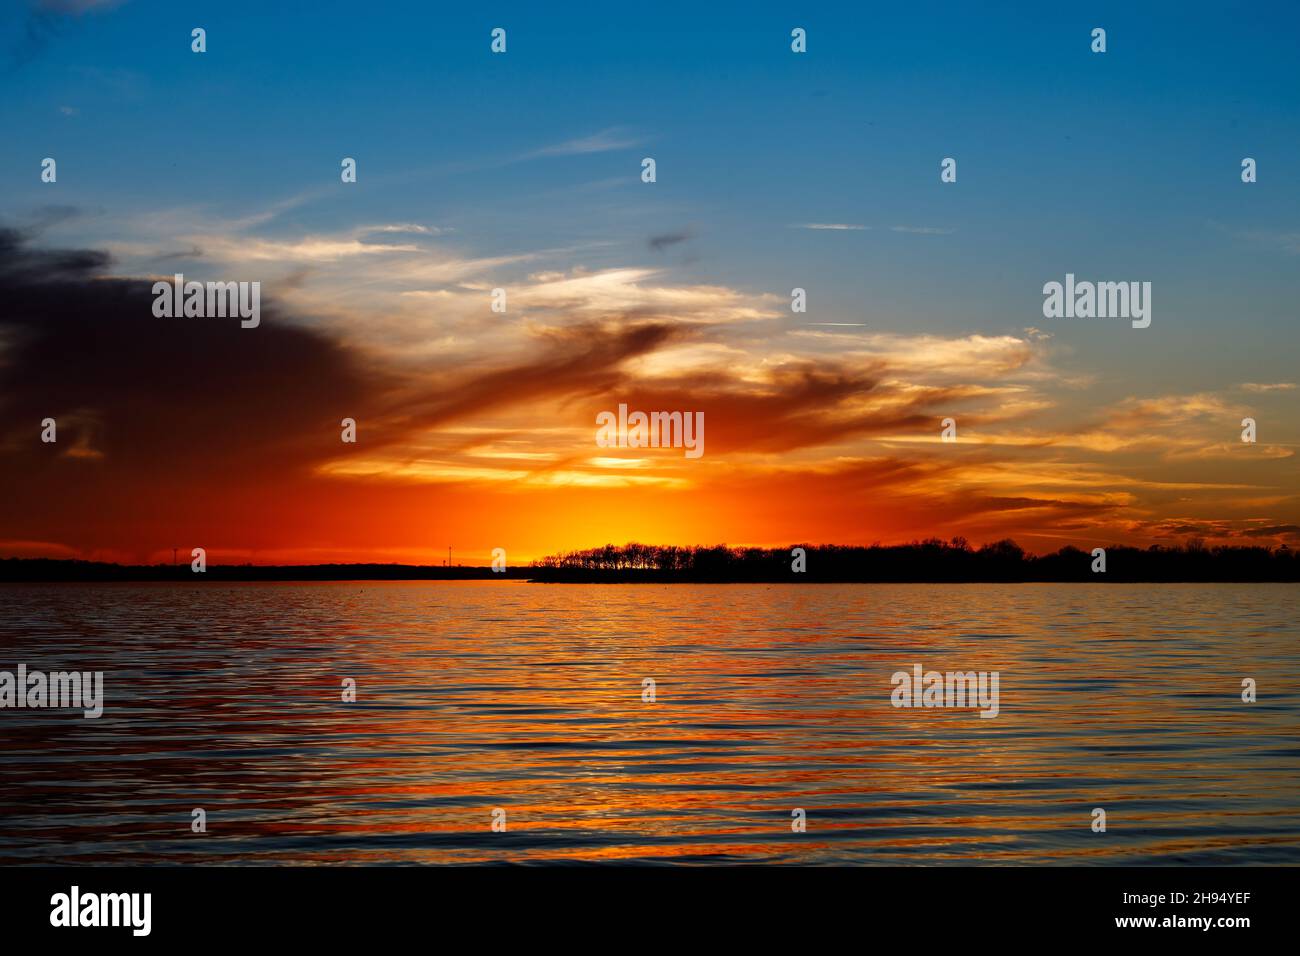 Cloudy sunset over a lake in Oklahoma. Stock Photo